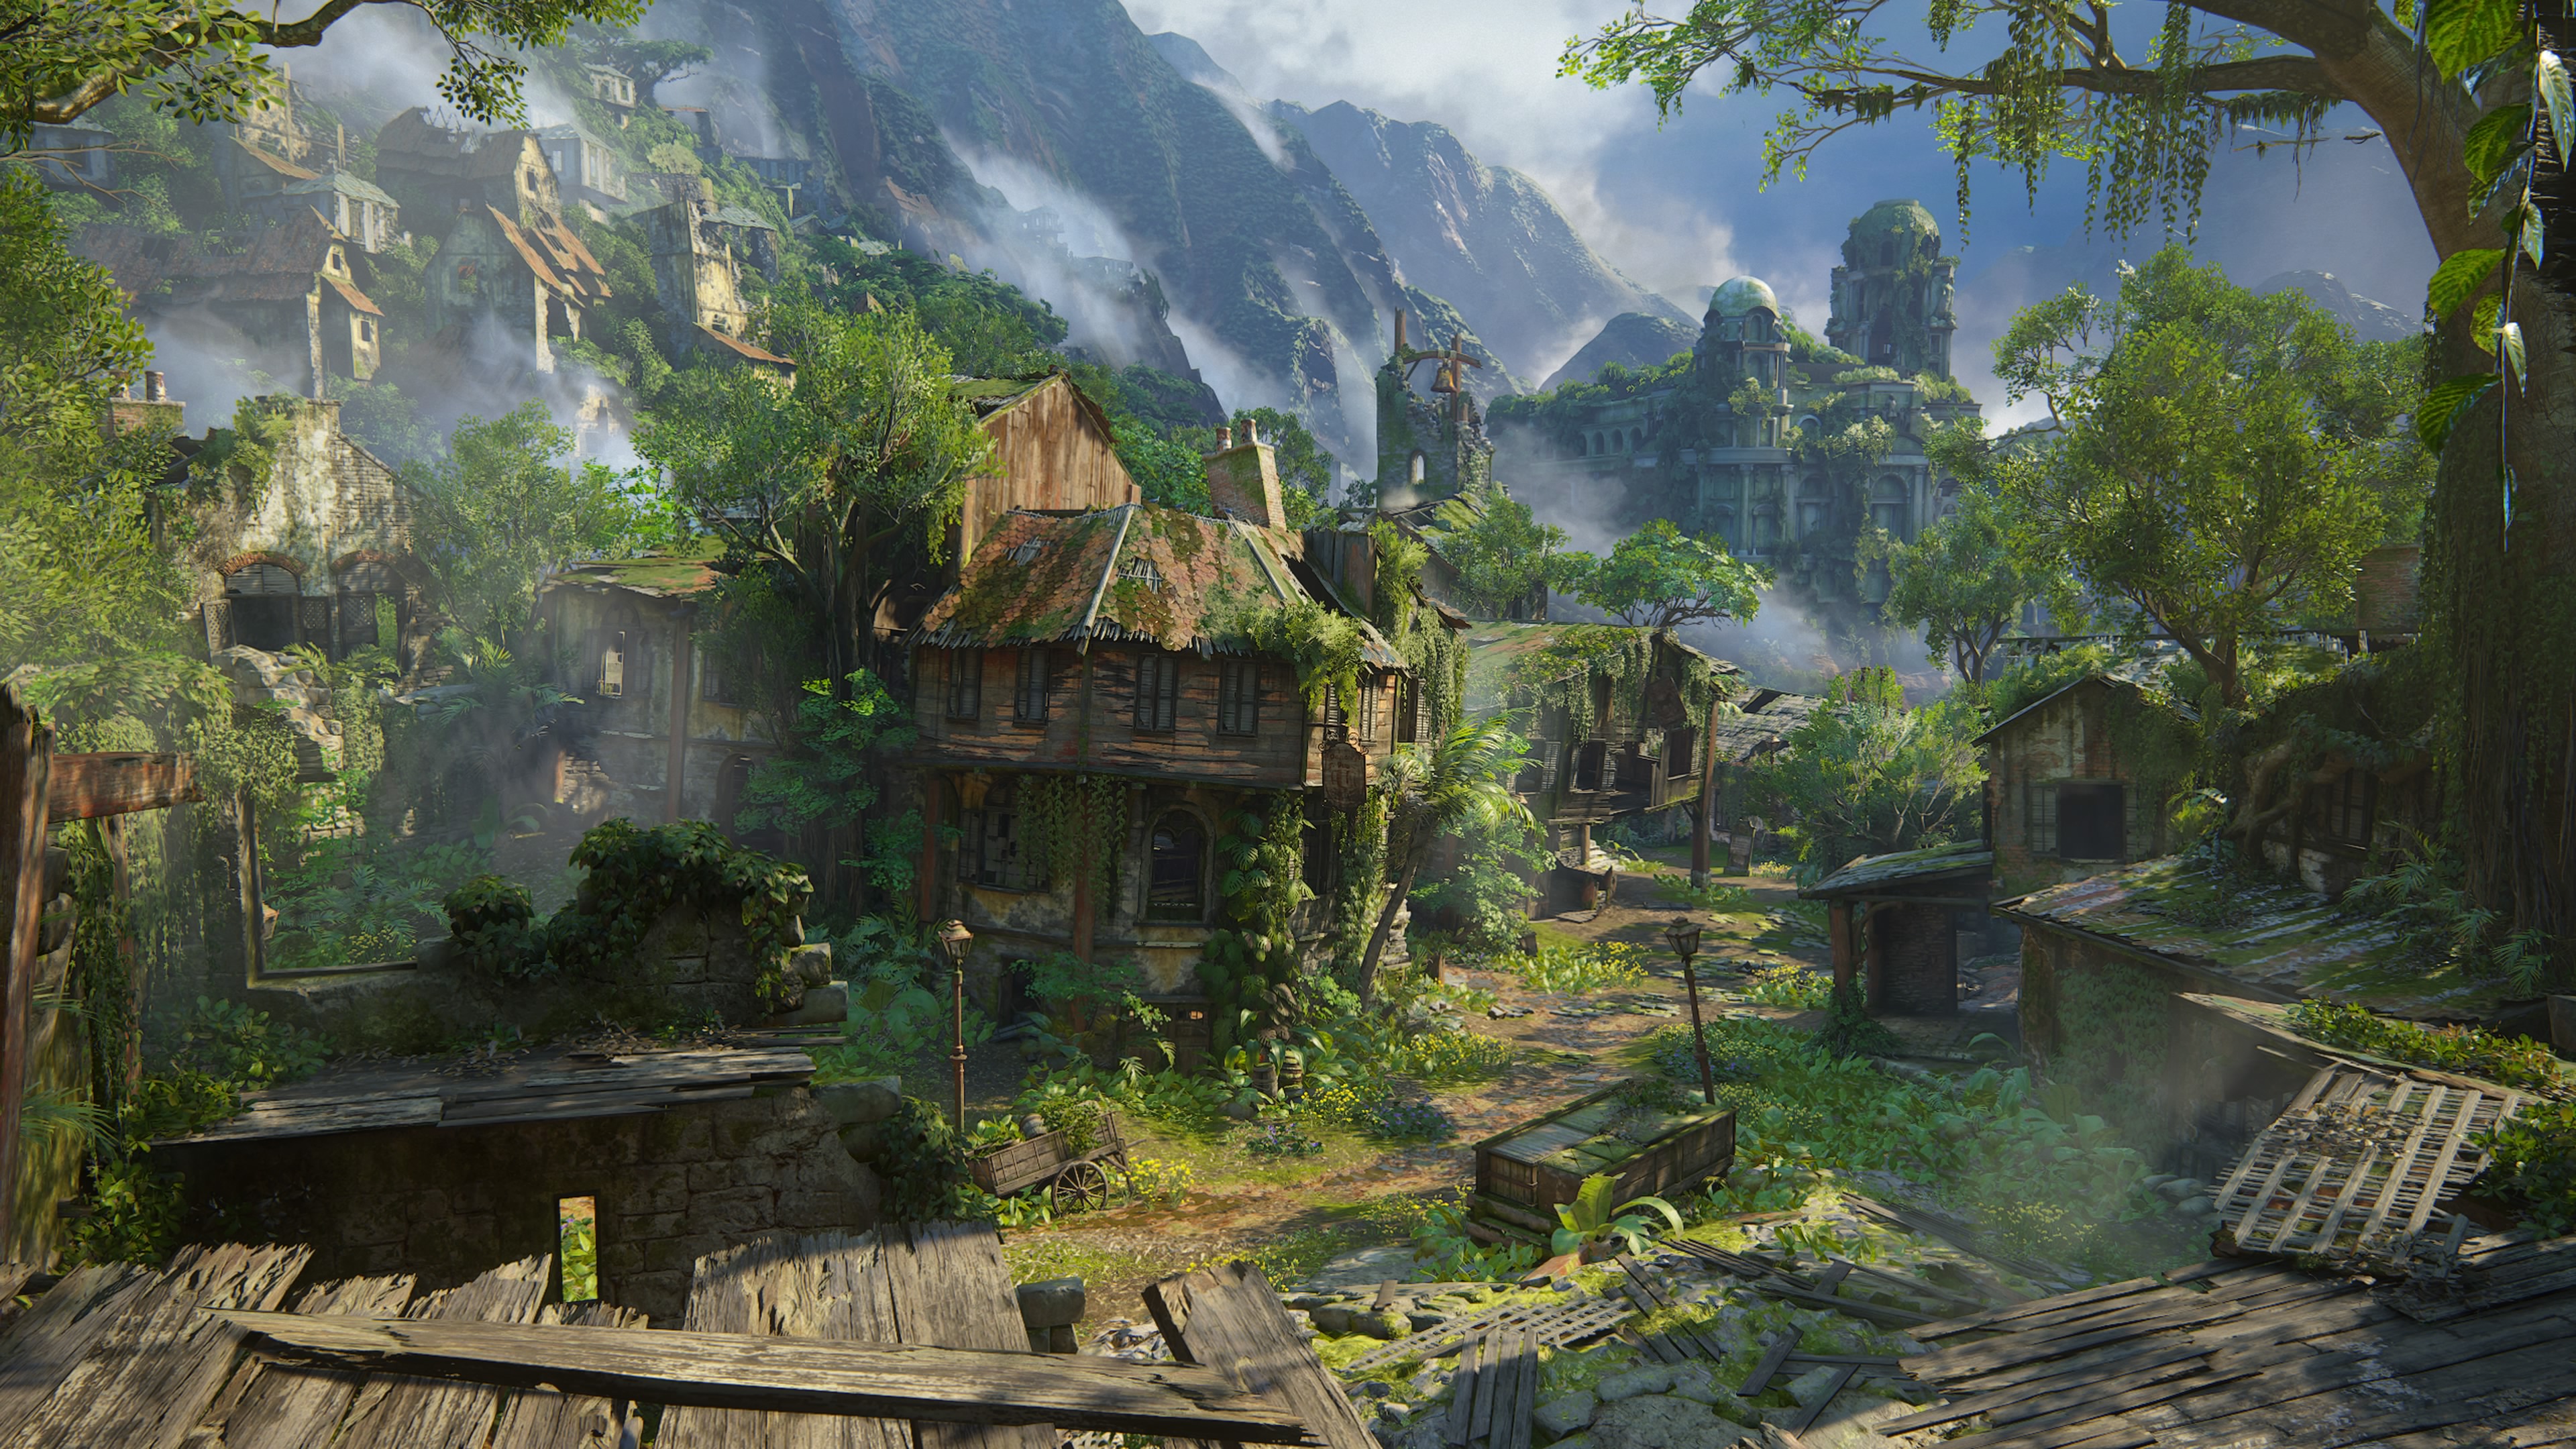 General 3840x2160 Uncharted 4: A Thief's End video games nature PlayStation 4 overgrown ruins old building city jungle video game art